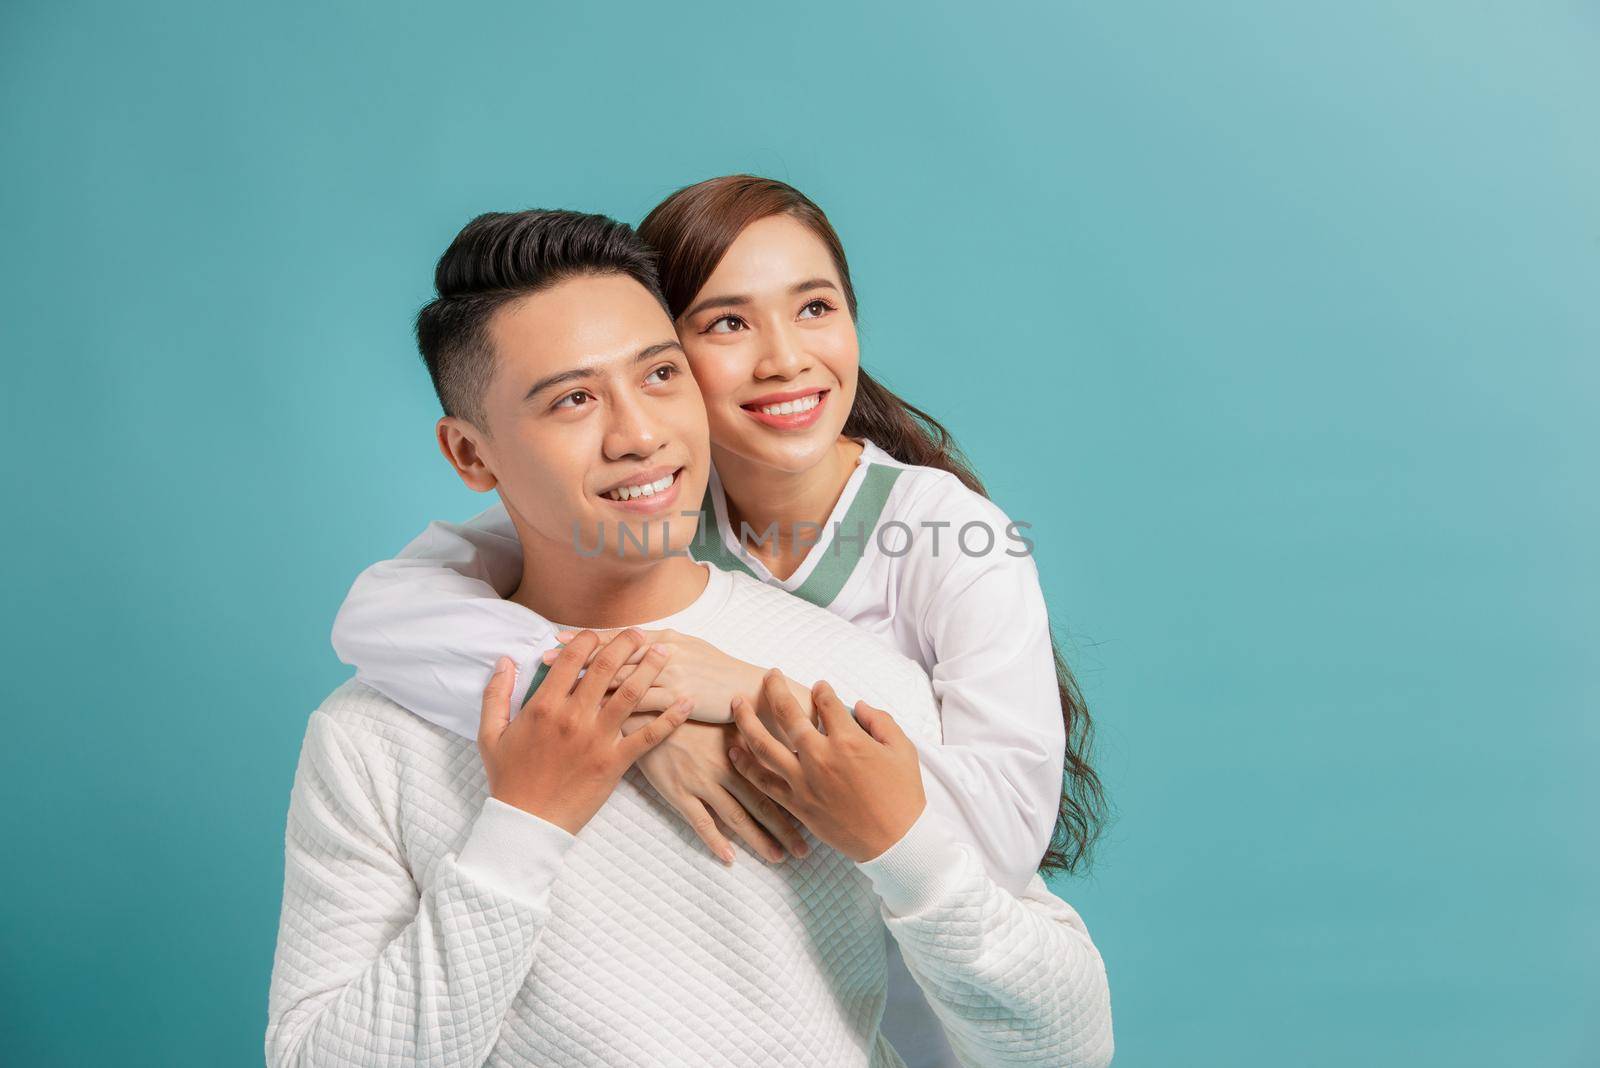 Studio shot of romantic couple posing with smile. Front view of girl and boy hugs on blue background.